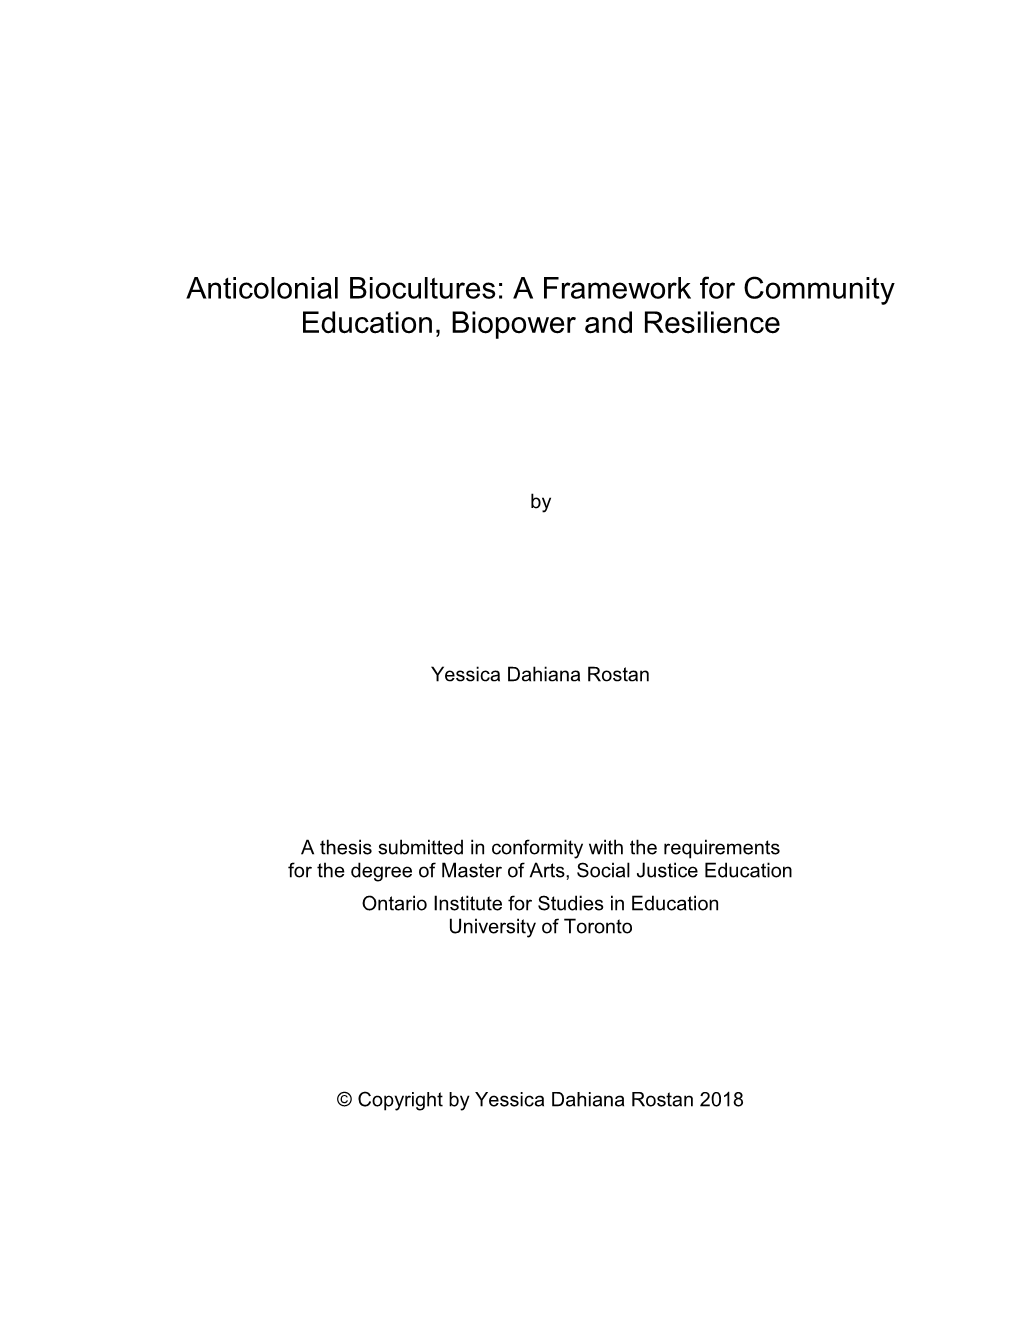 Anticolonial Biocultures: a Framework for Community Education, Biopower and Resilience